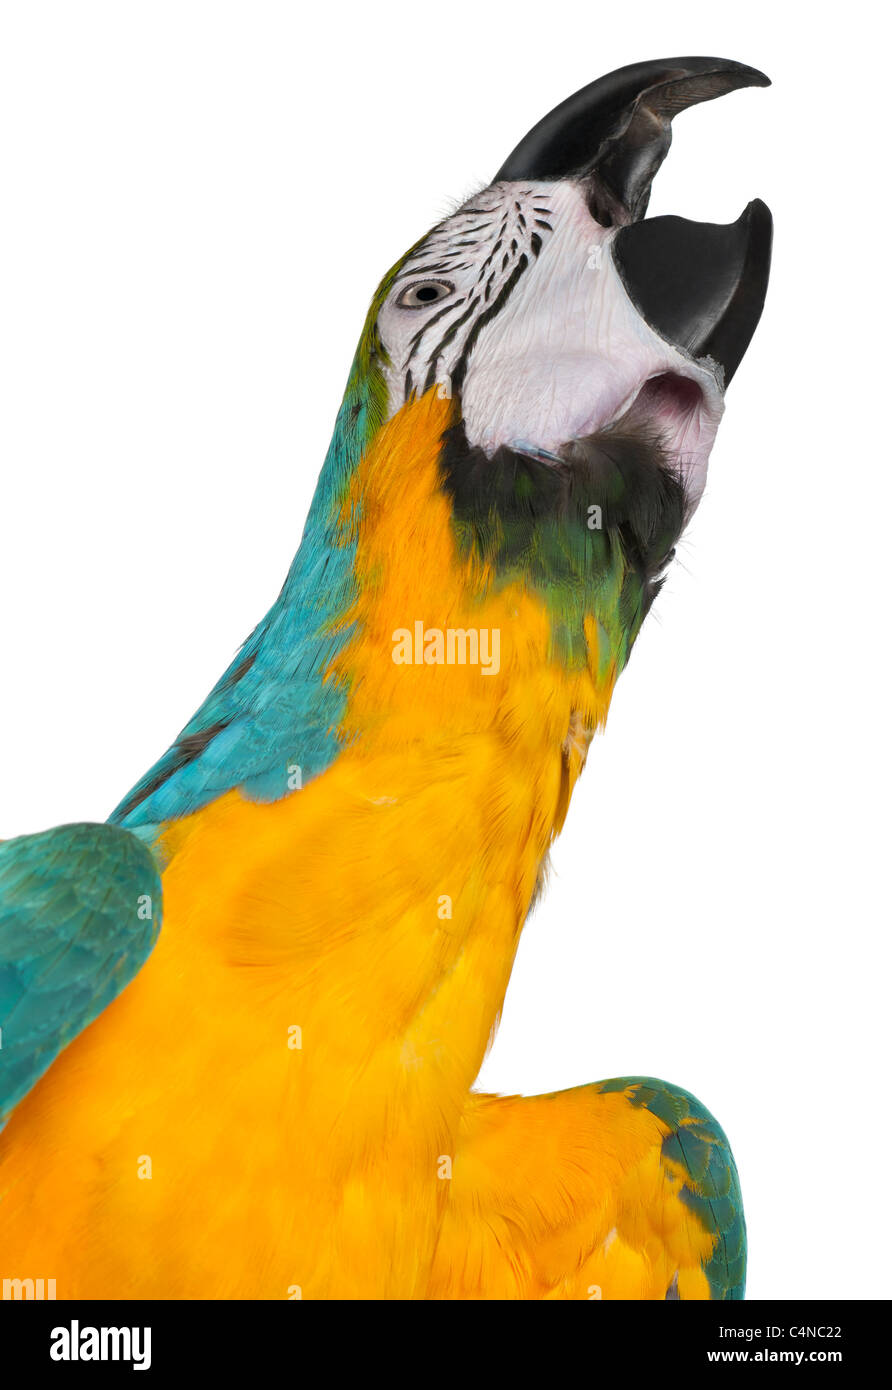 Close-up of Blue-and-Yellow Macaw, Ara ararauna, 16 months old, in front of white background Stock Photo